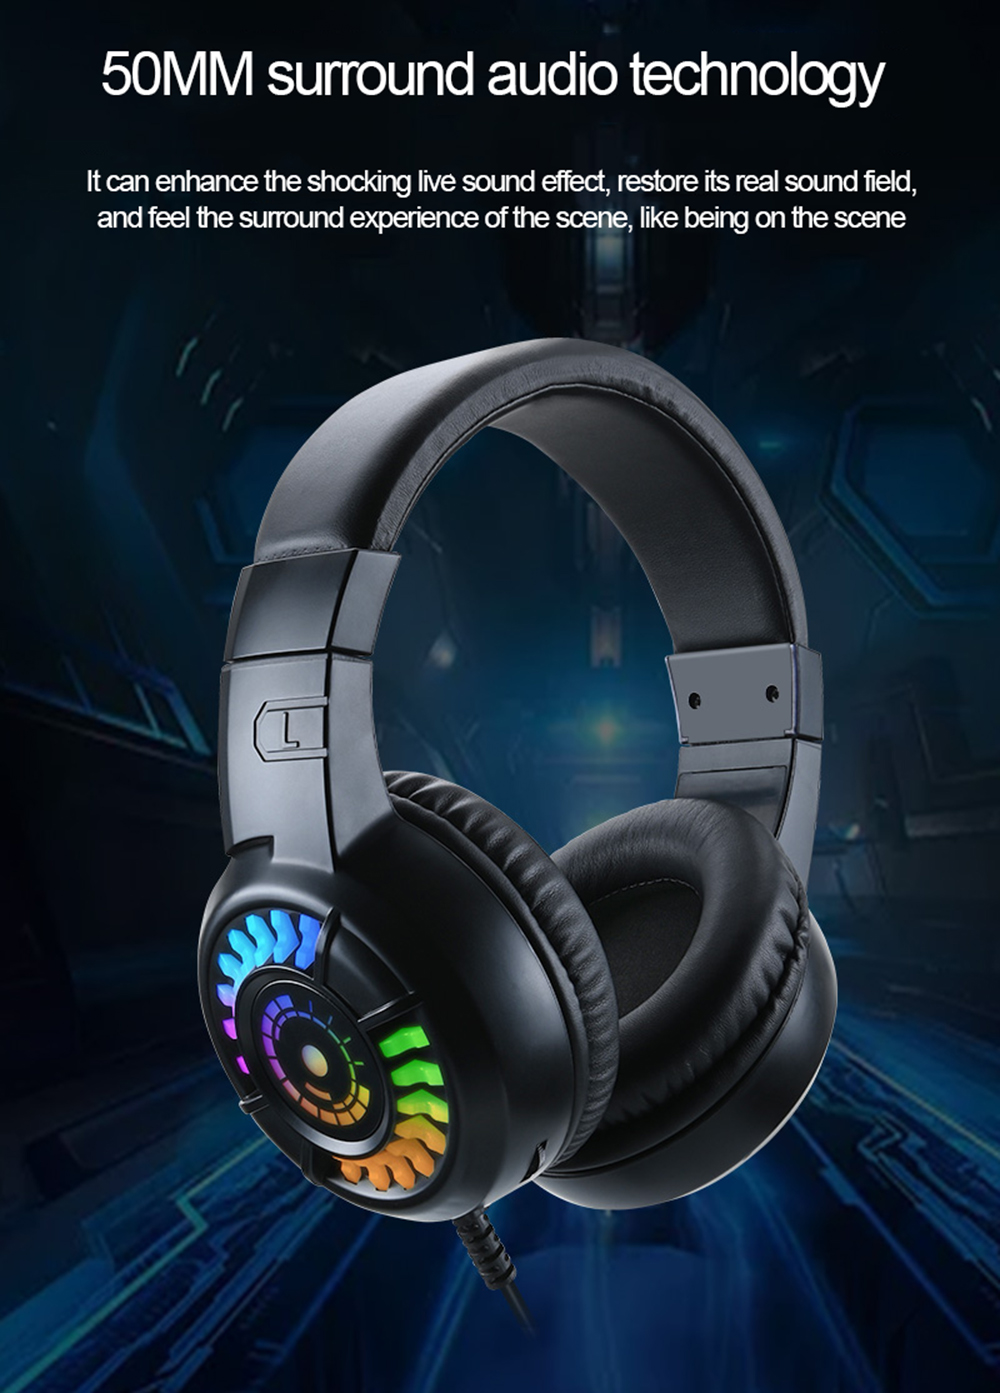 198I-A7-E-sport-Gaming-Headset-50mm-Unit-55mm-Speaker-Size-Cool-Lighting-Built-in-Microphone-35mmUSB-1802467-7